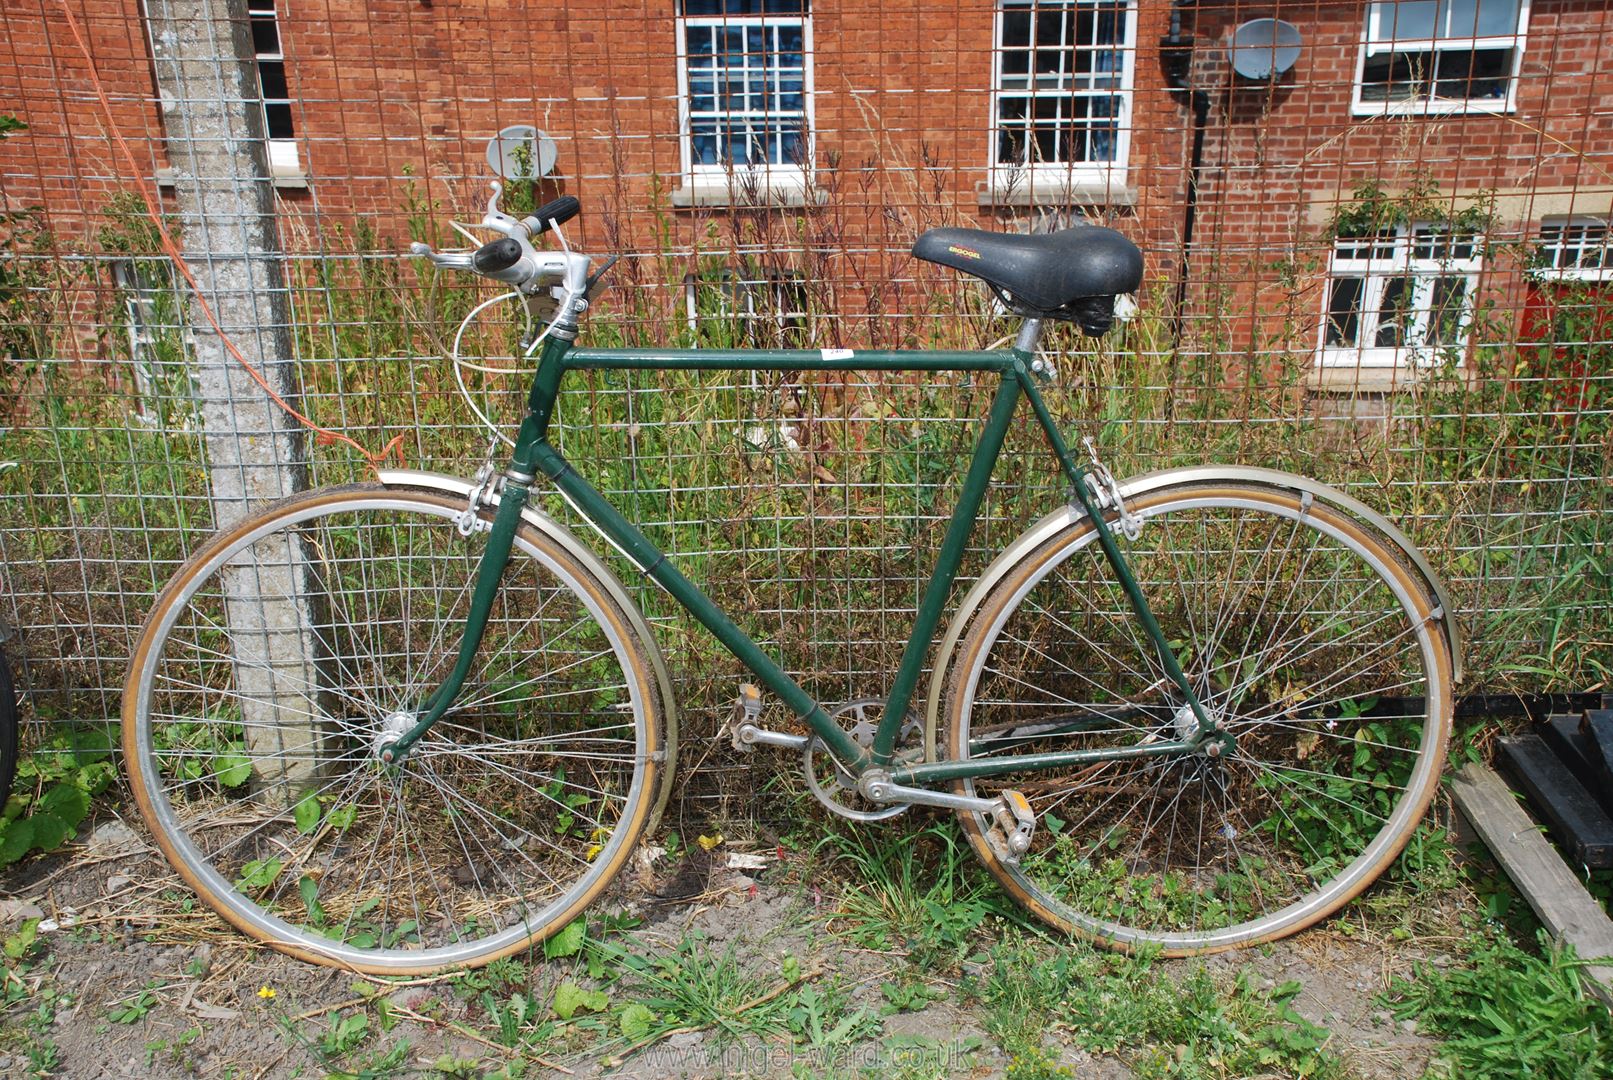 A gents Raleigh bicycle with 5 gears and 27" racing wheels.